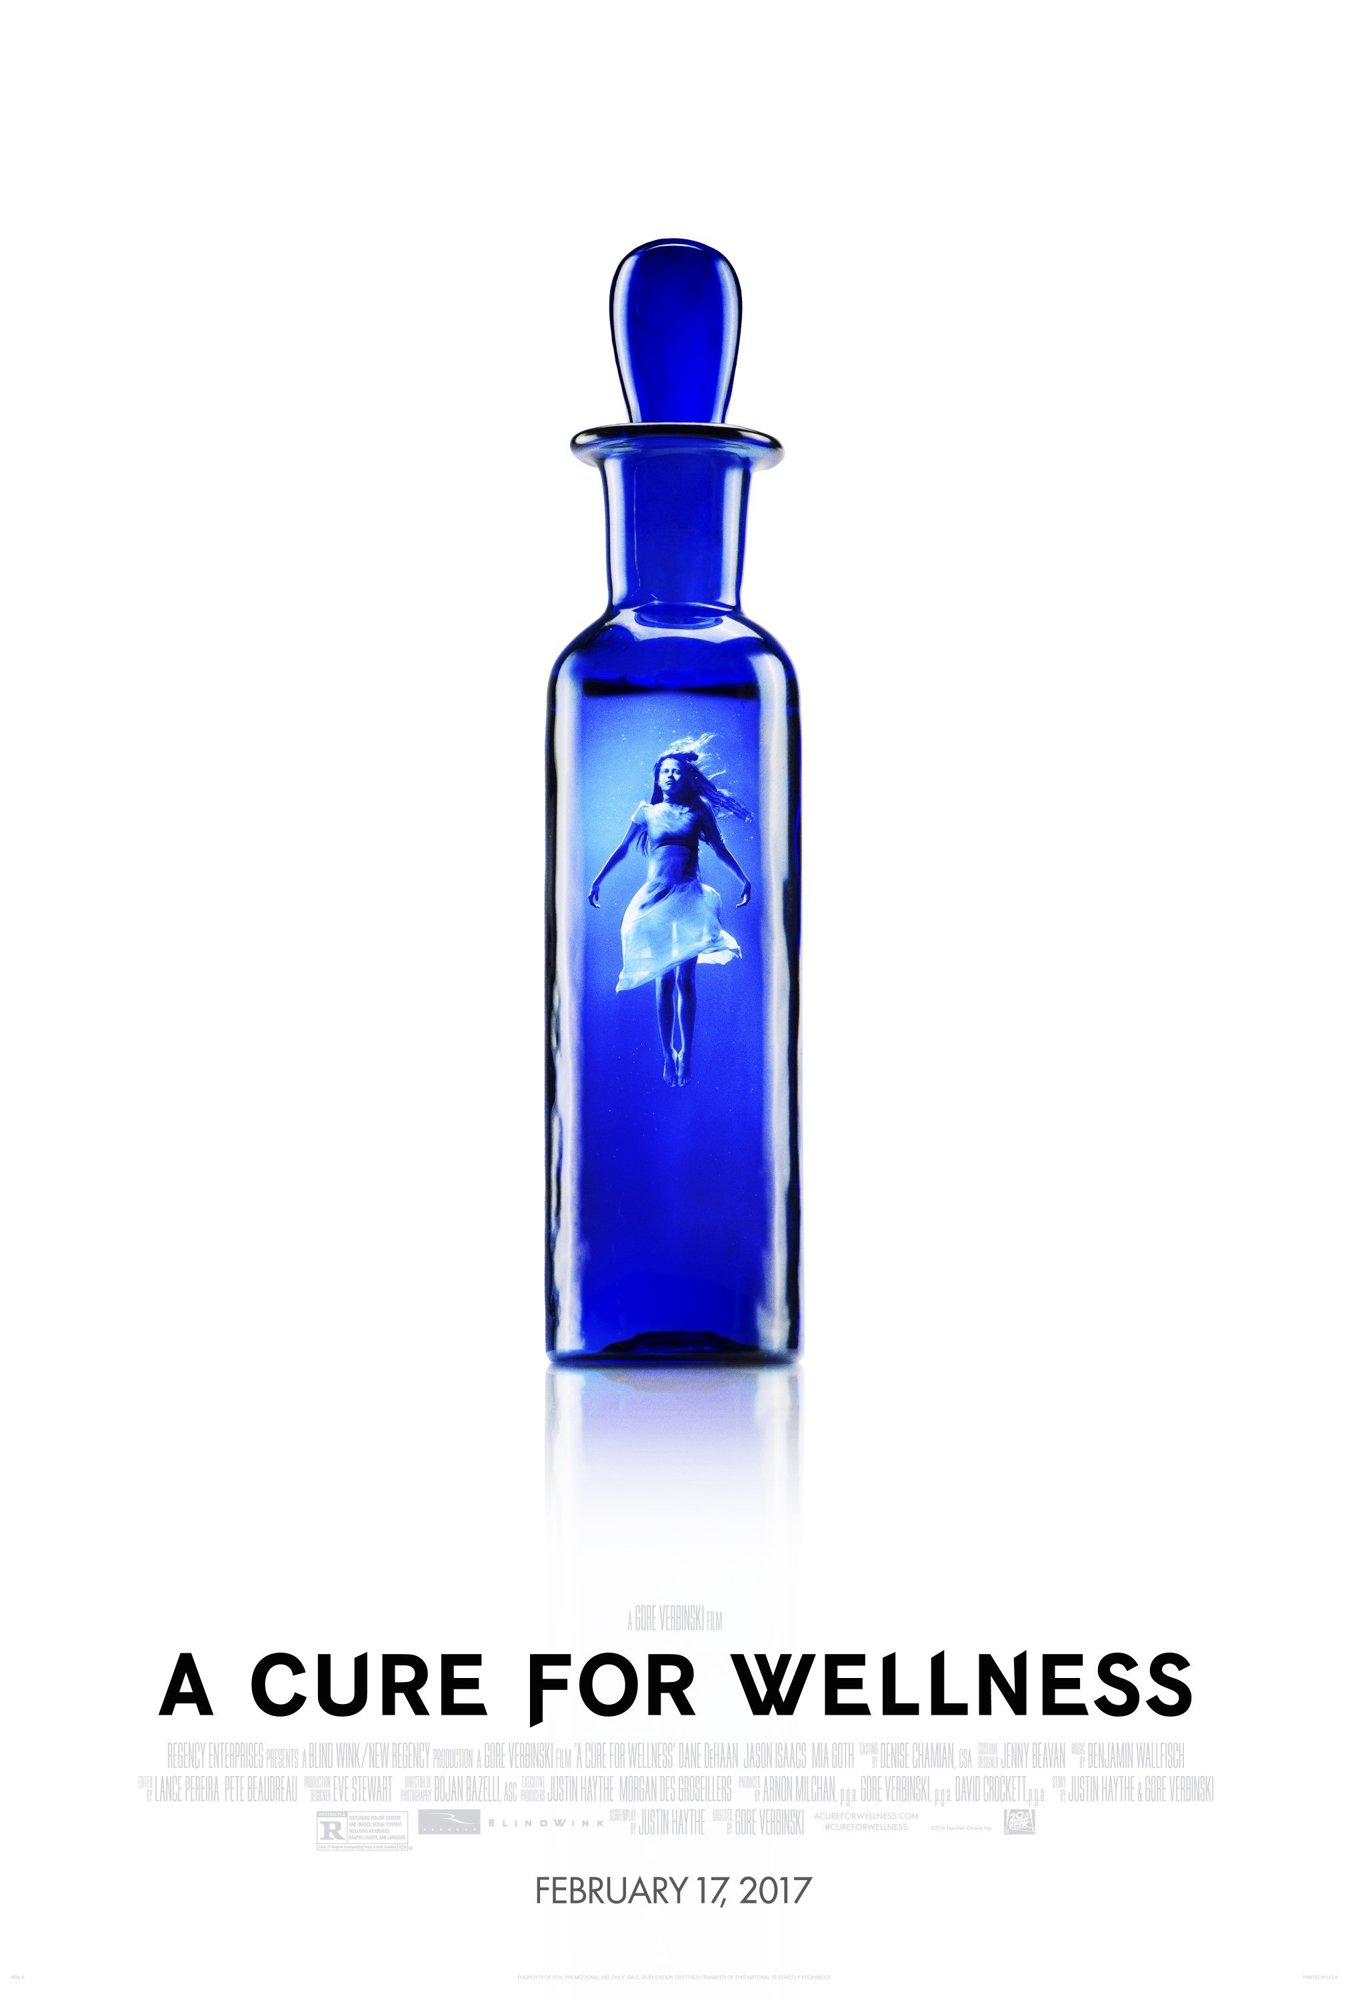 Poster of 20th Century Fox's ACure for Wellness (2017)